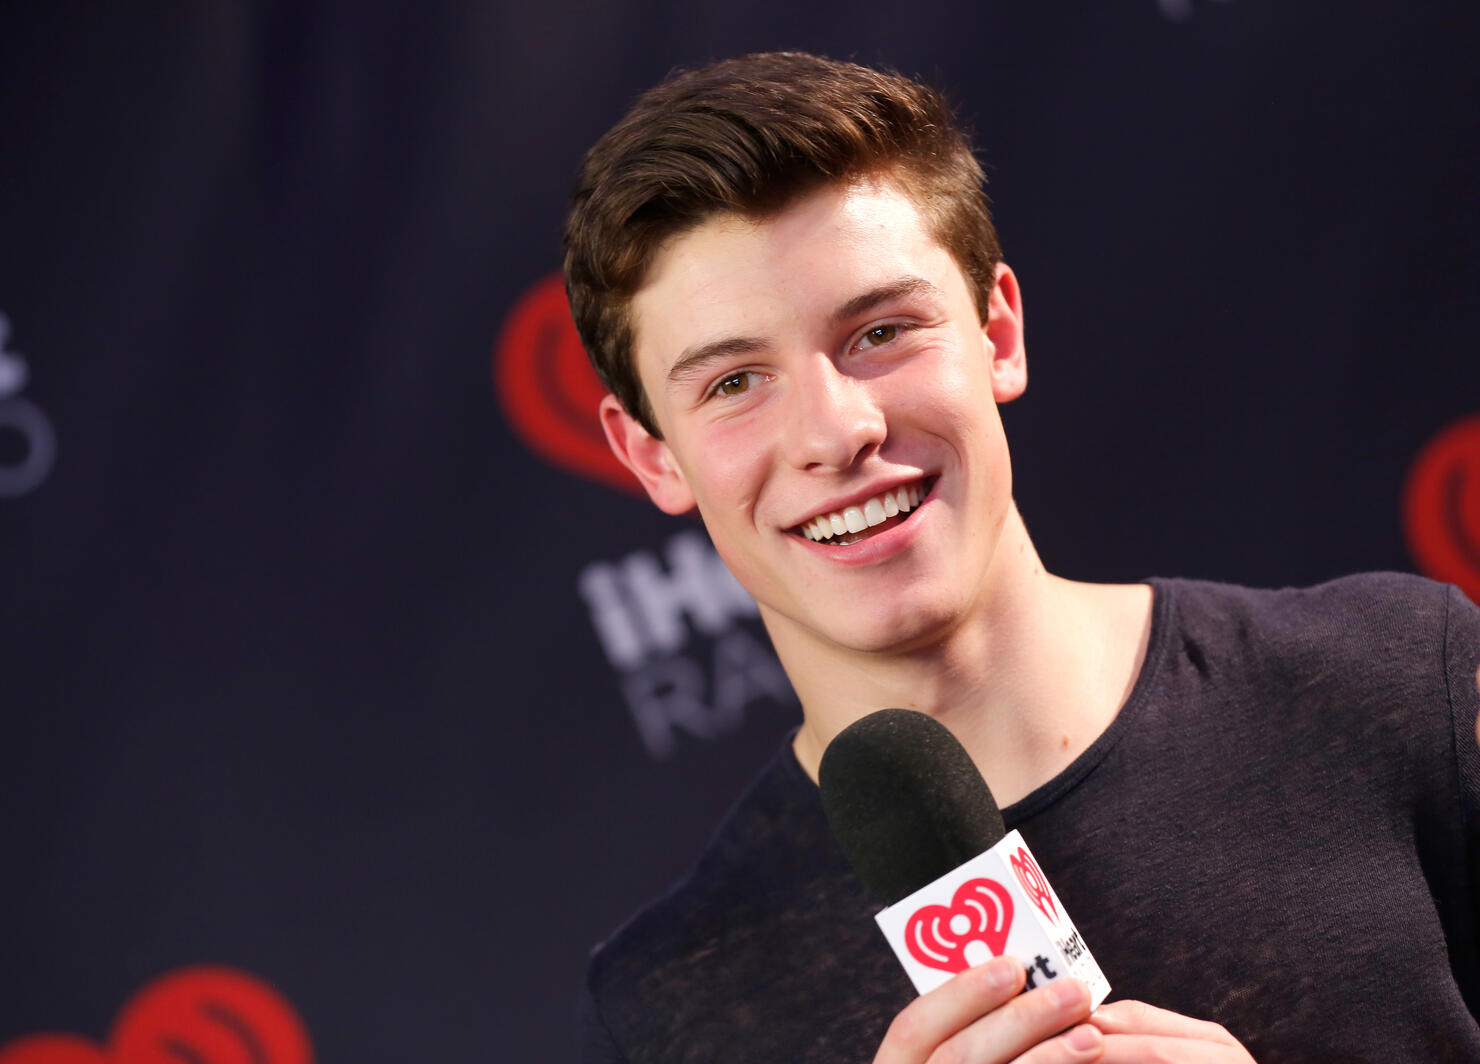 C. Shawn Mendes!